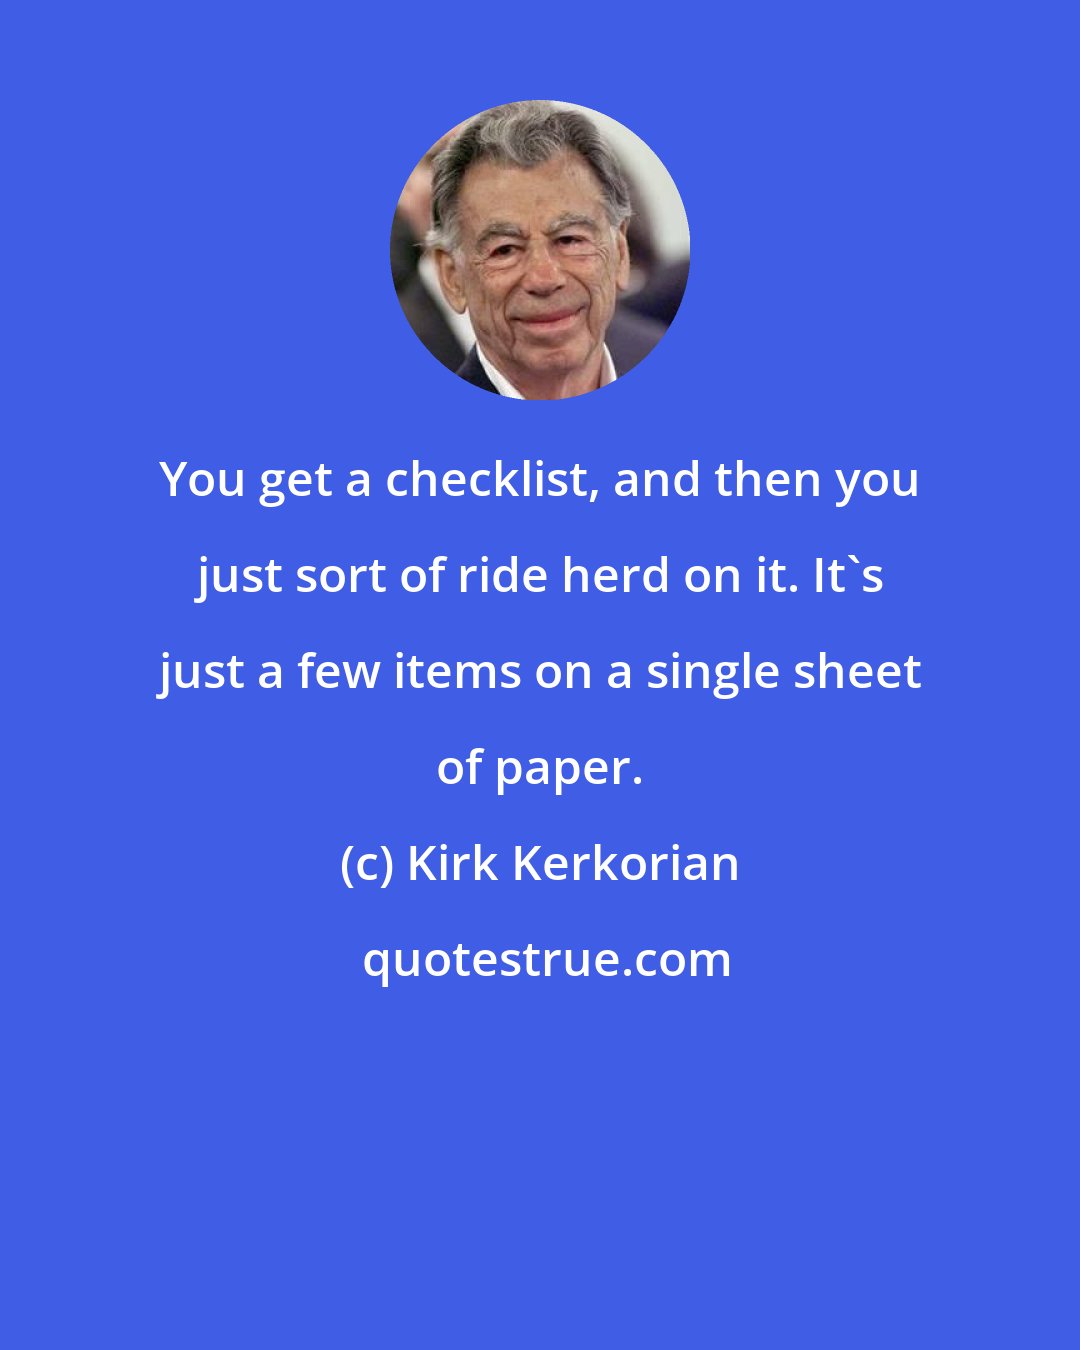 Kirk Kerkorian: You get a checklist, and then you just sort of ride herd on it. It's just a few items on a single sheet of paper.